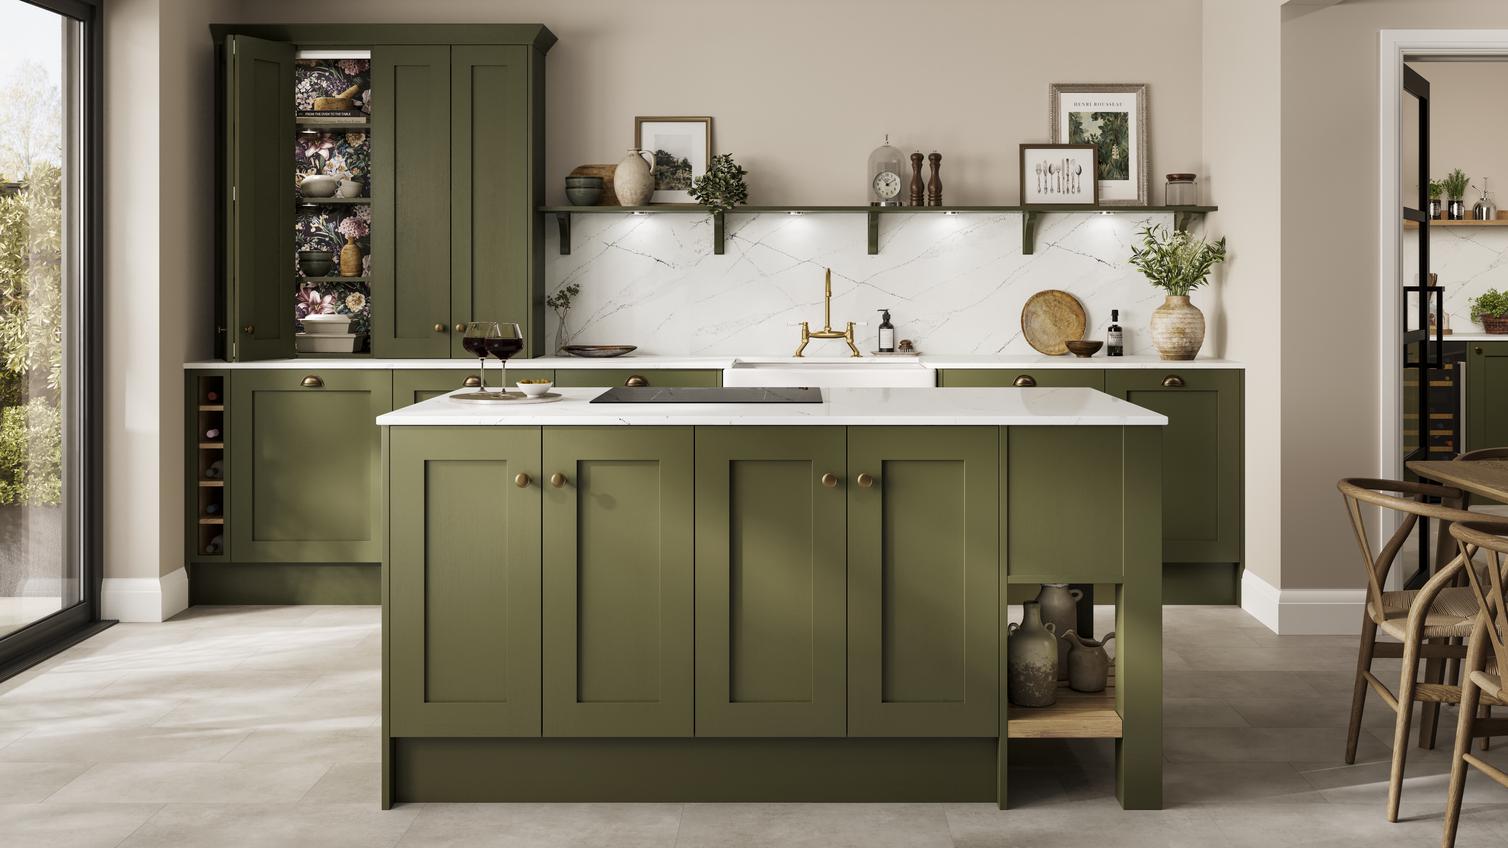 An olive green kitchen in an island layout with white worktops throughout, matching backboard and integrated hob.